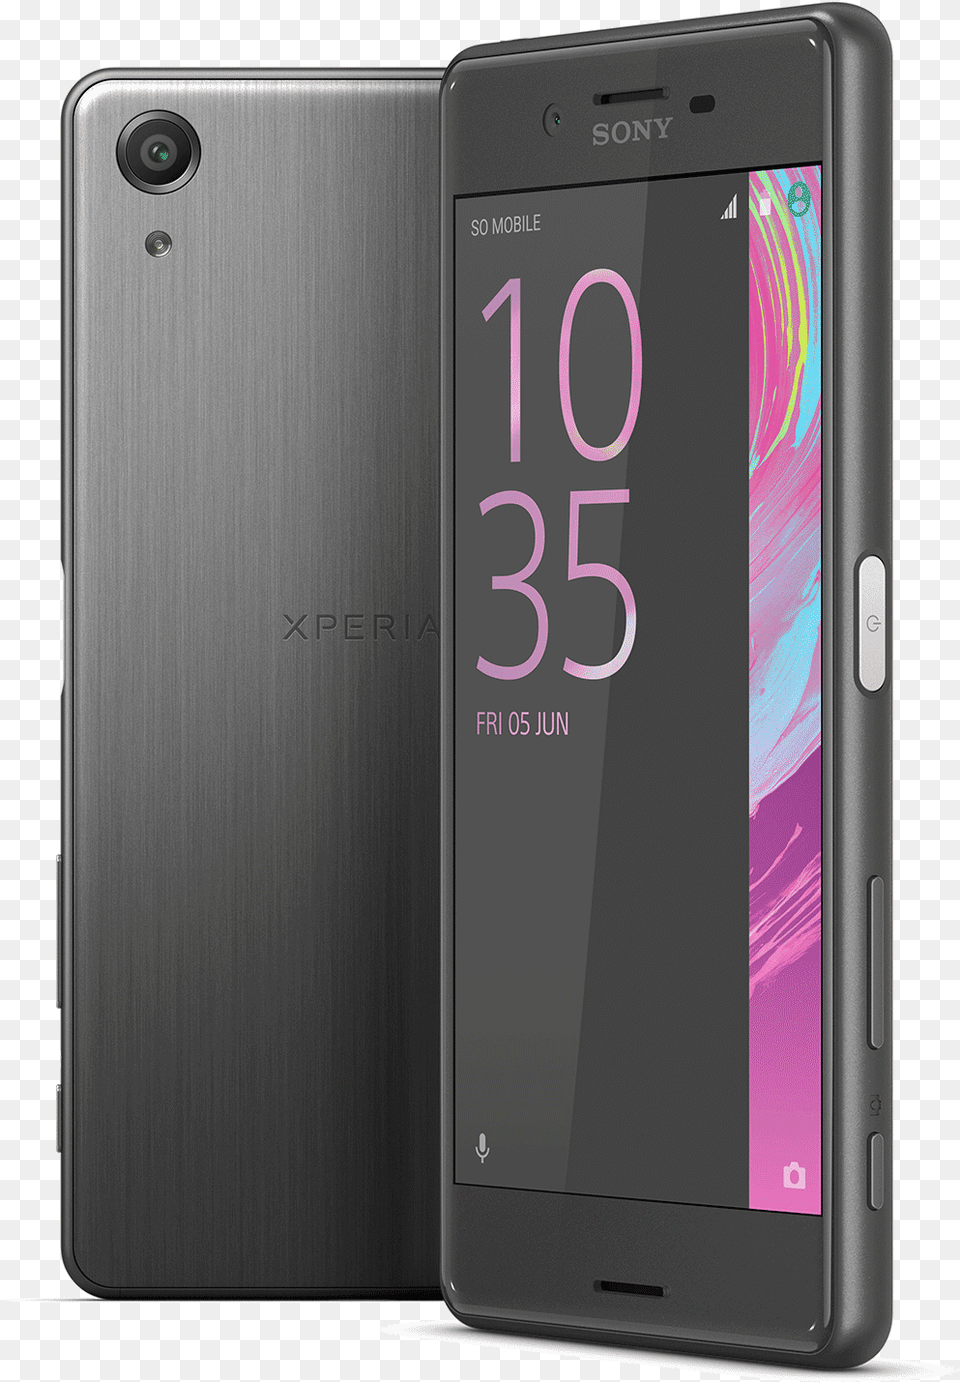 Sony Xperia X Performance Download Sony Xperia X, Electronics, Mobile Phone, Phone Png